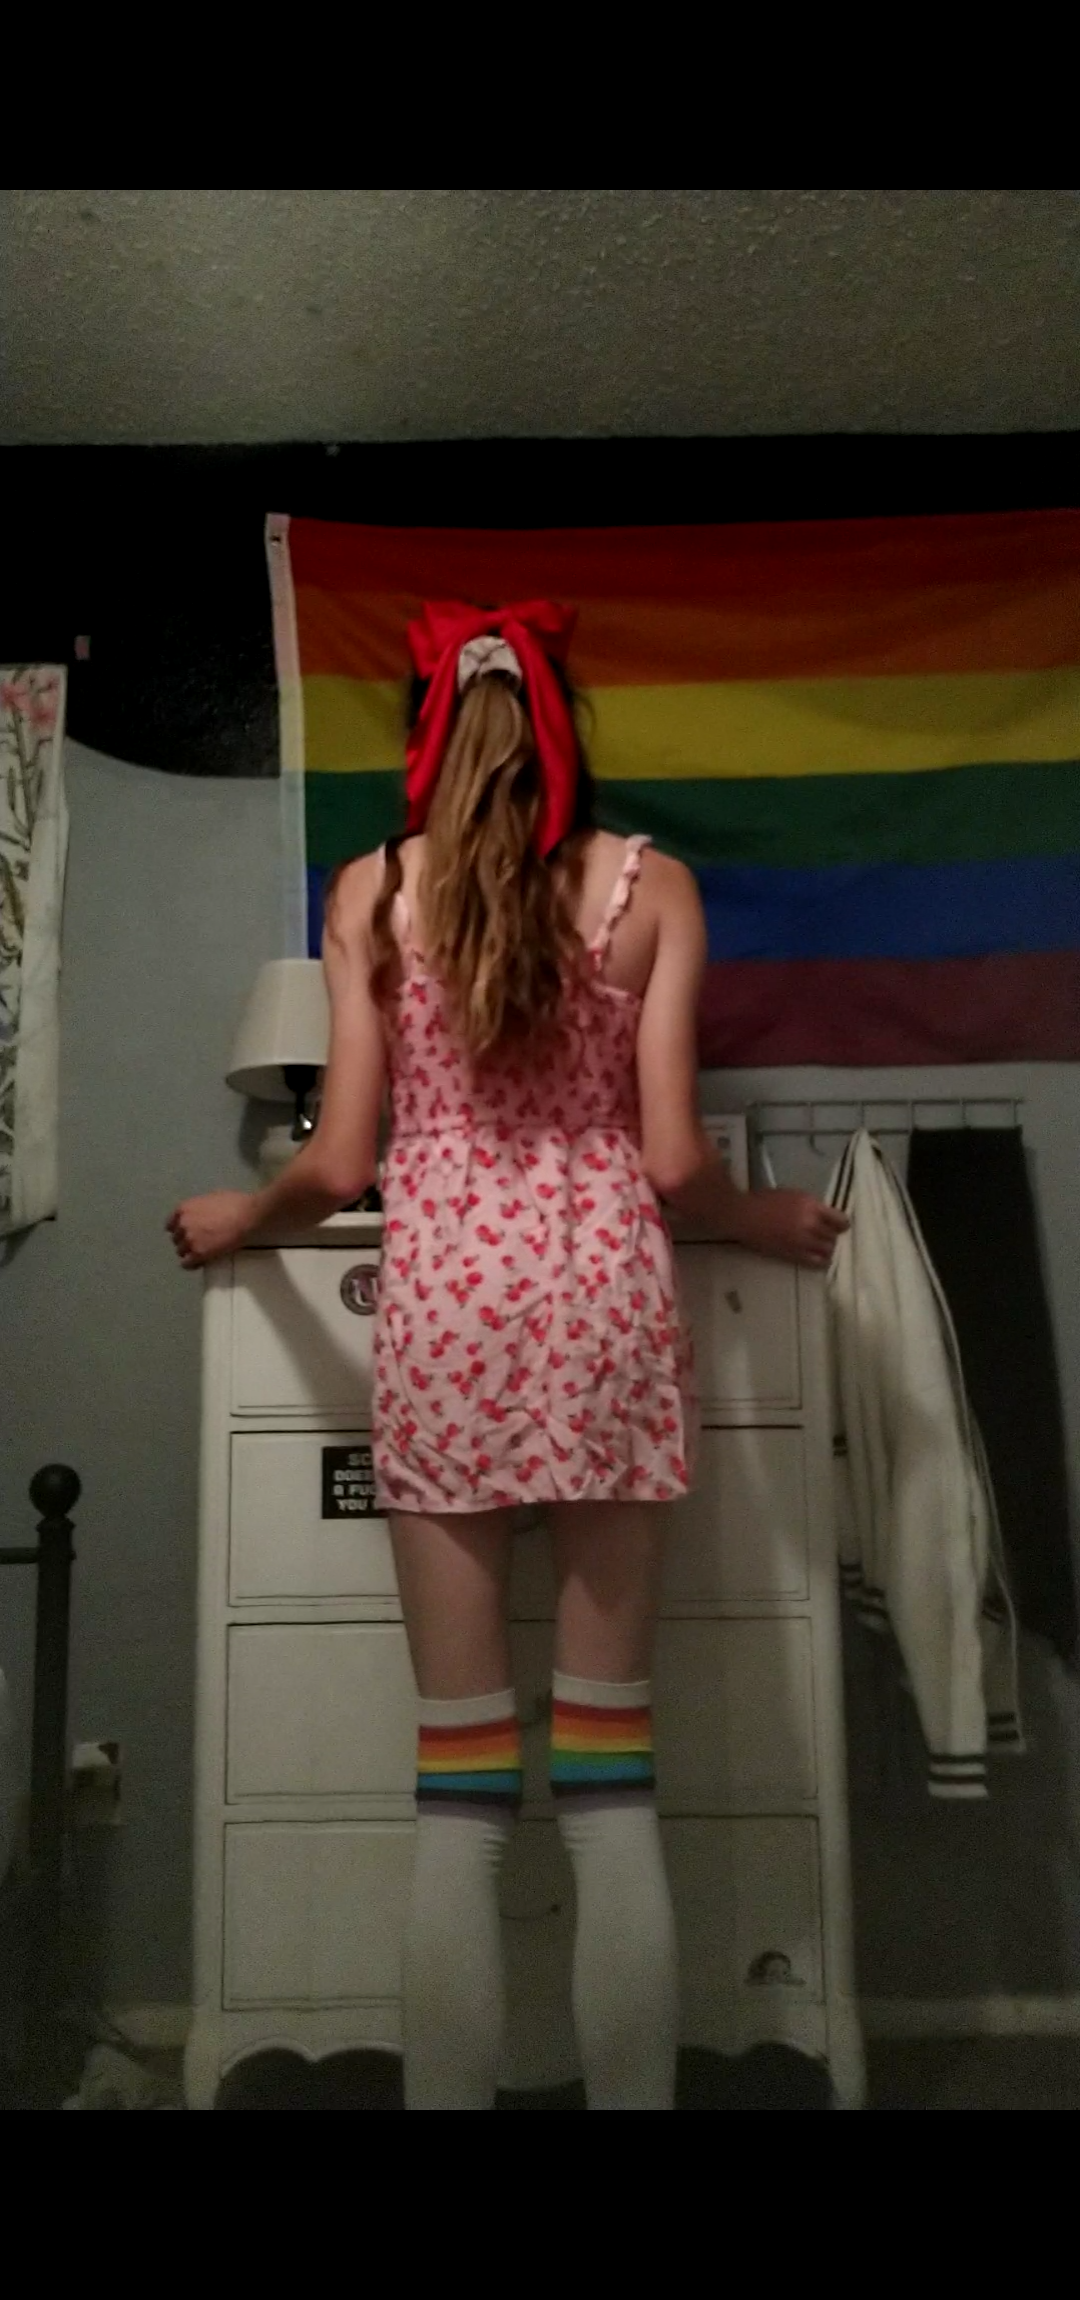 me wearing pink dress and red bow in my hair. facing away from camera